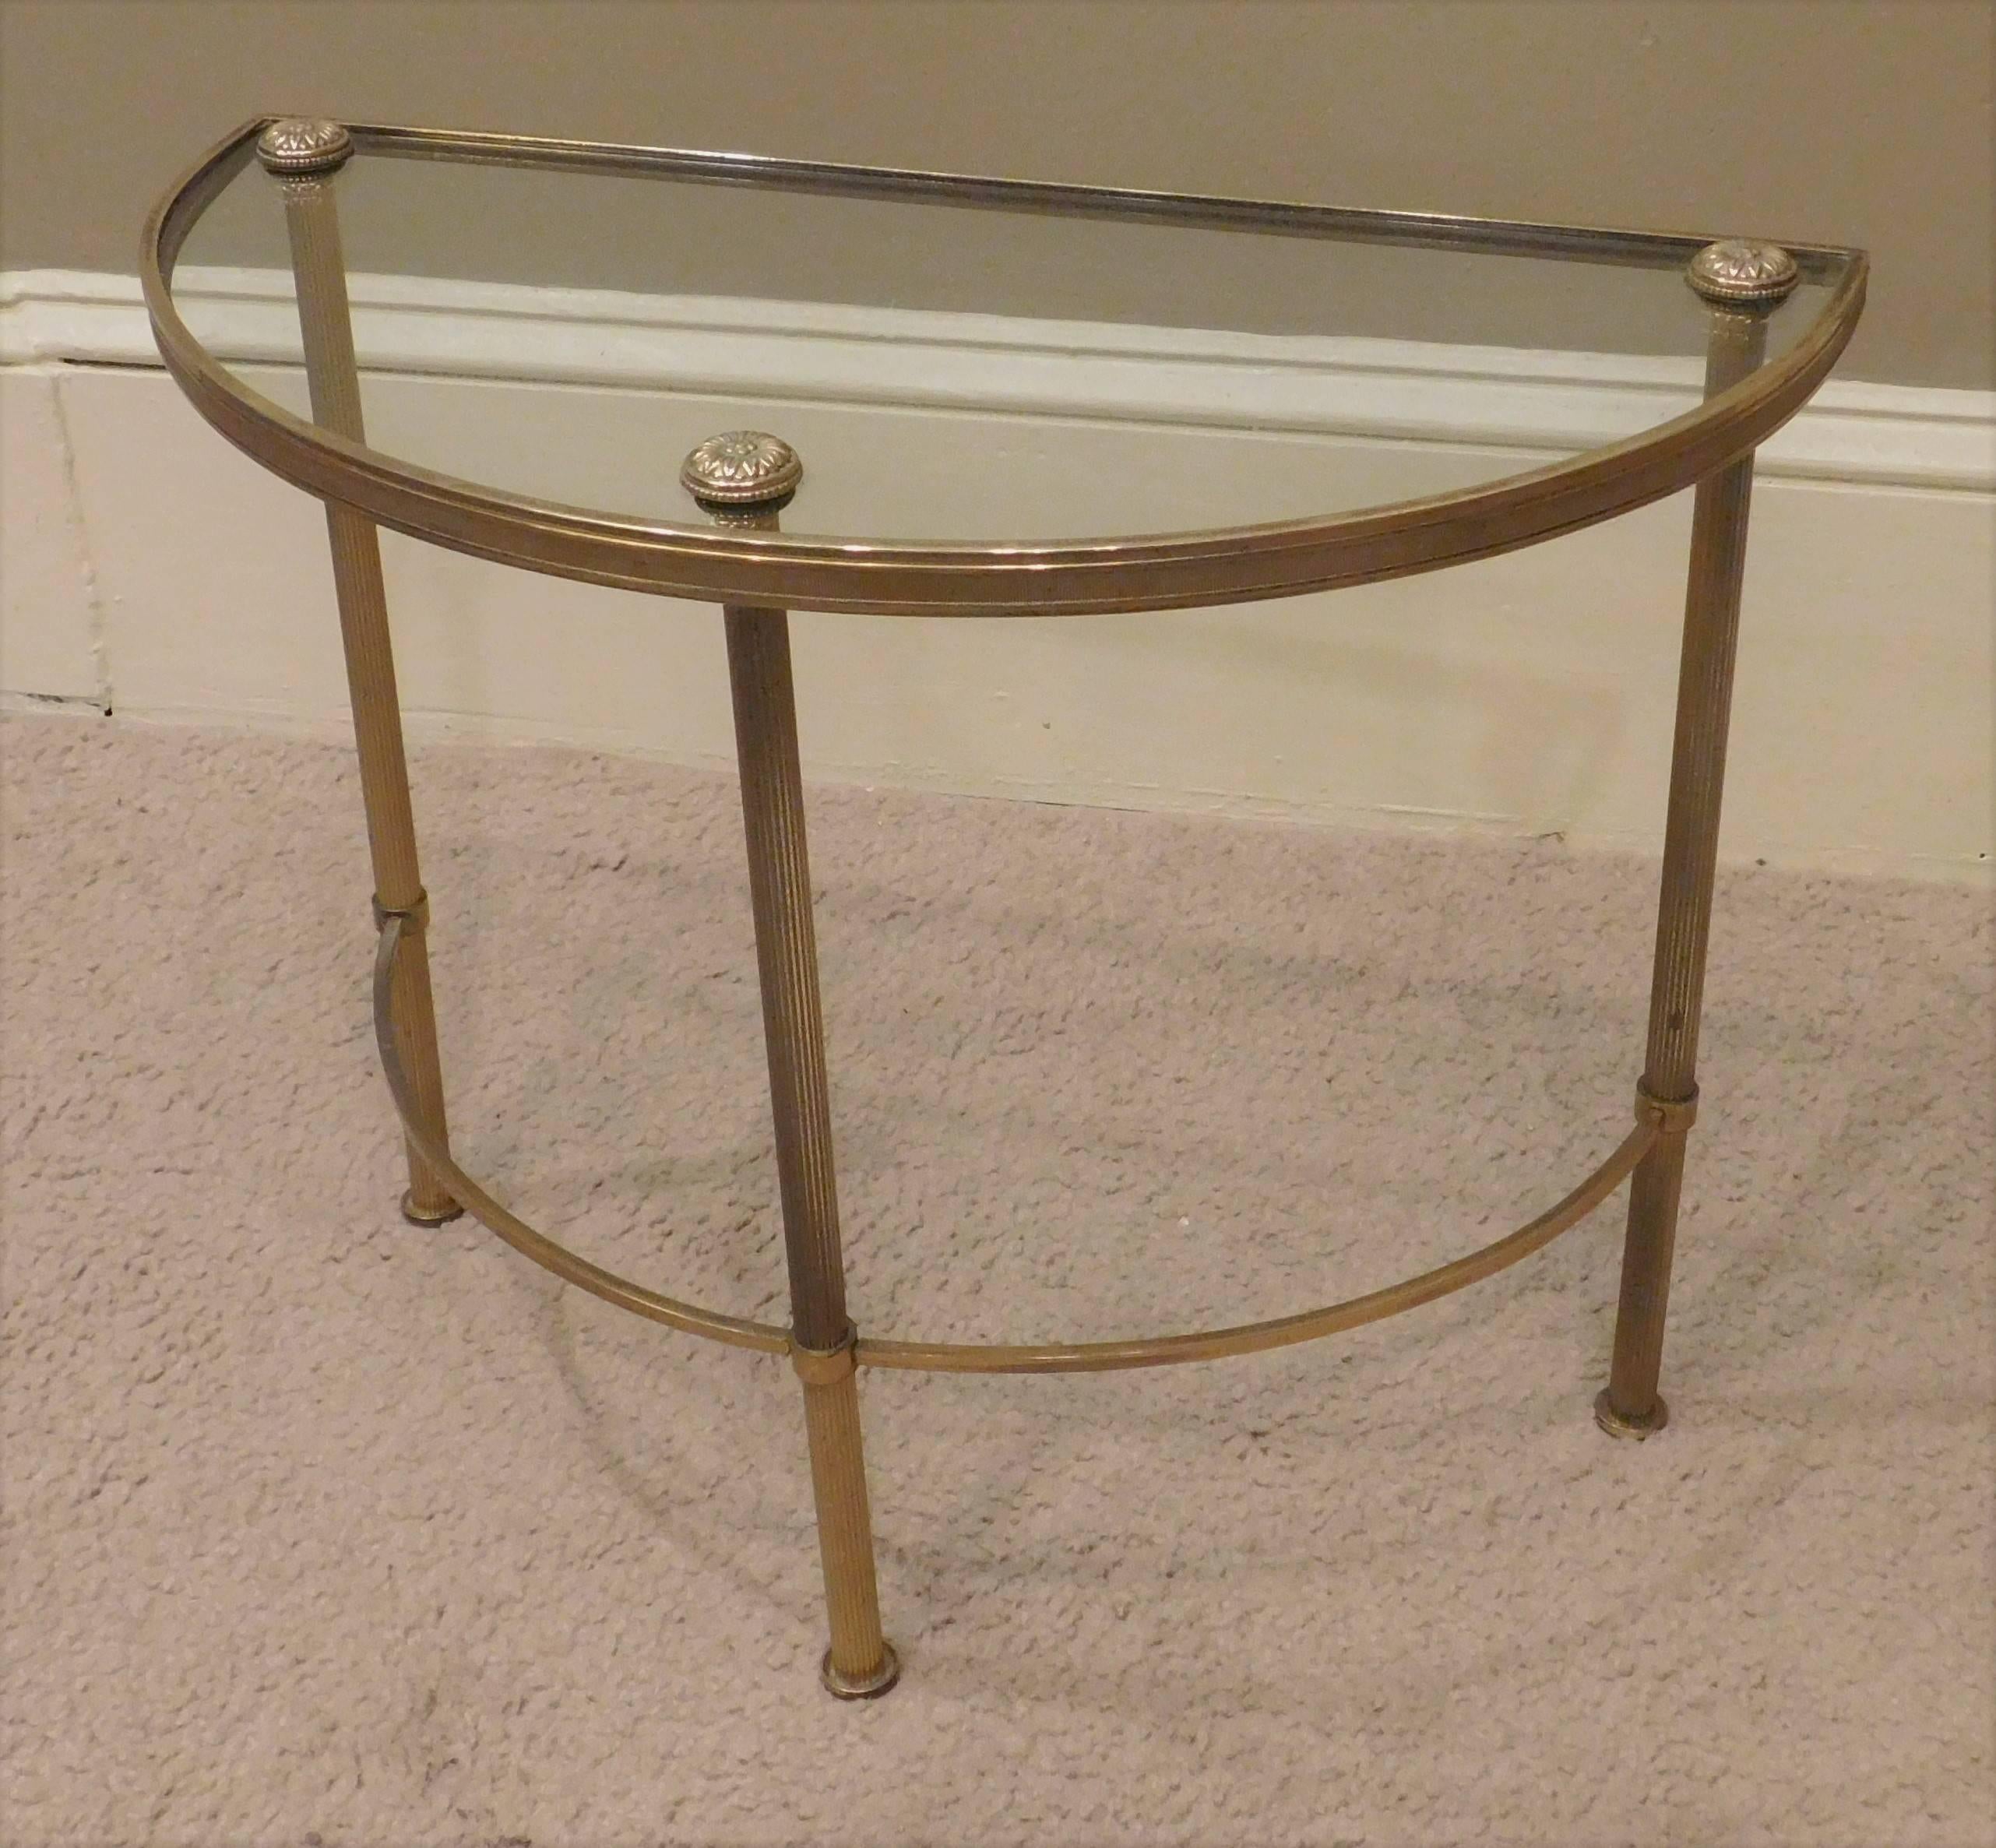 Mid-Century Modern Oblong Three-Part Brass and Glass Coffee Table, France, circa 1940